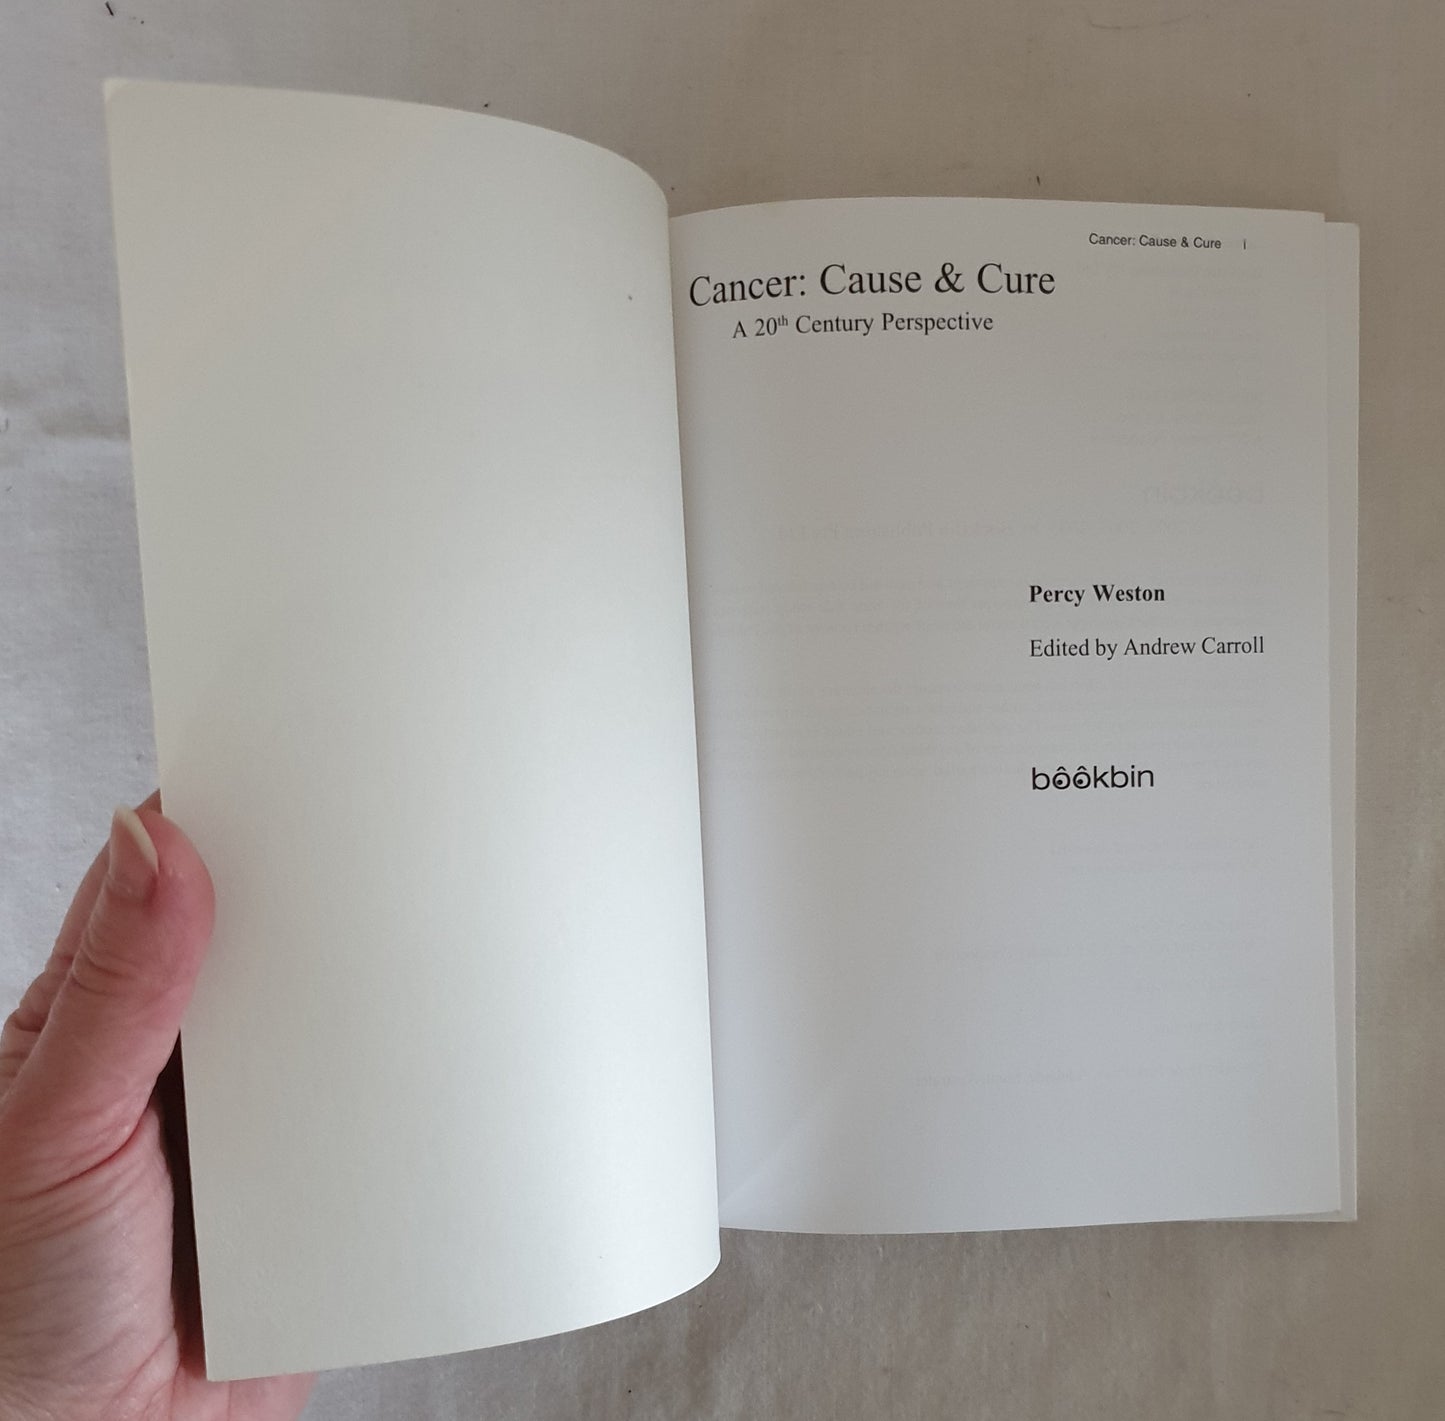 Cancer: Cause or Cure by Percy Weston